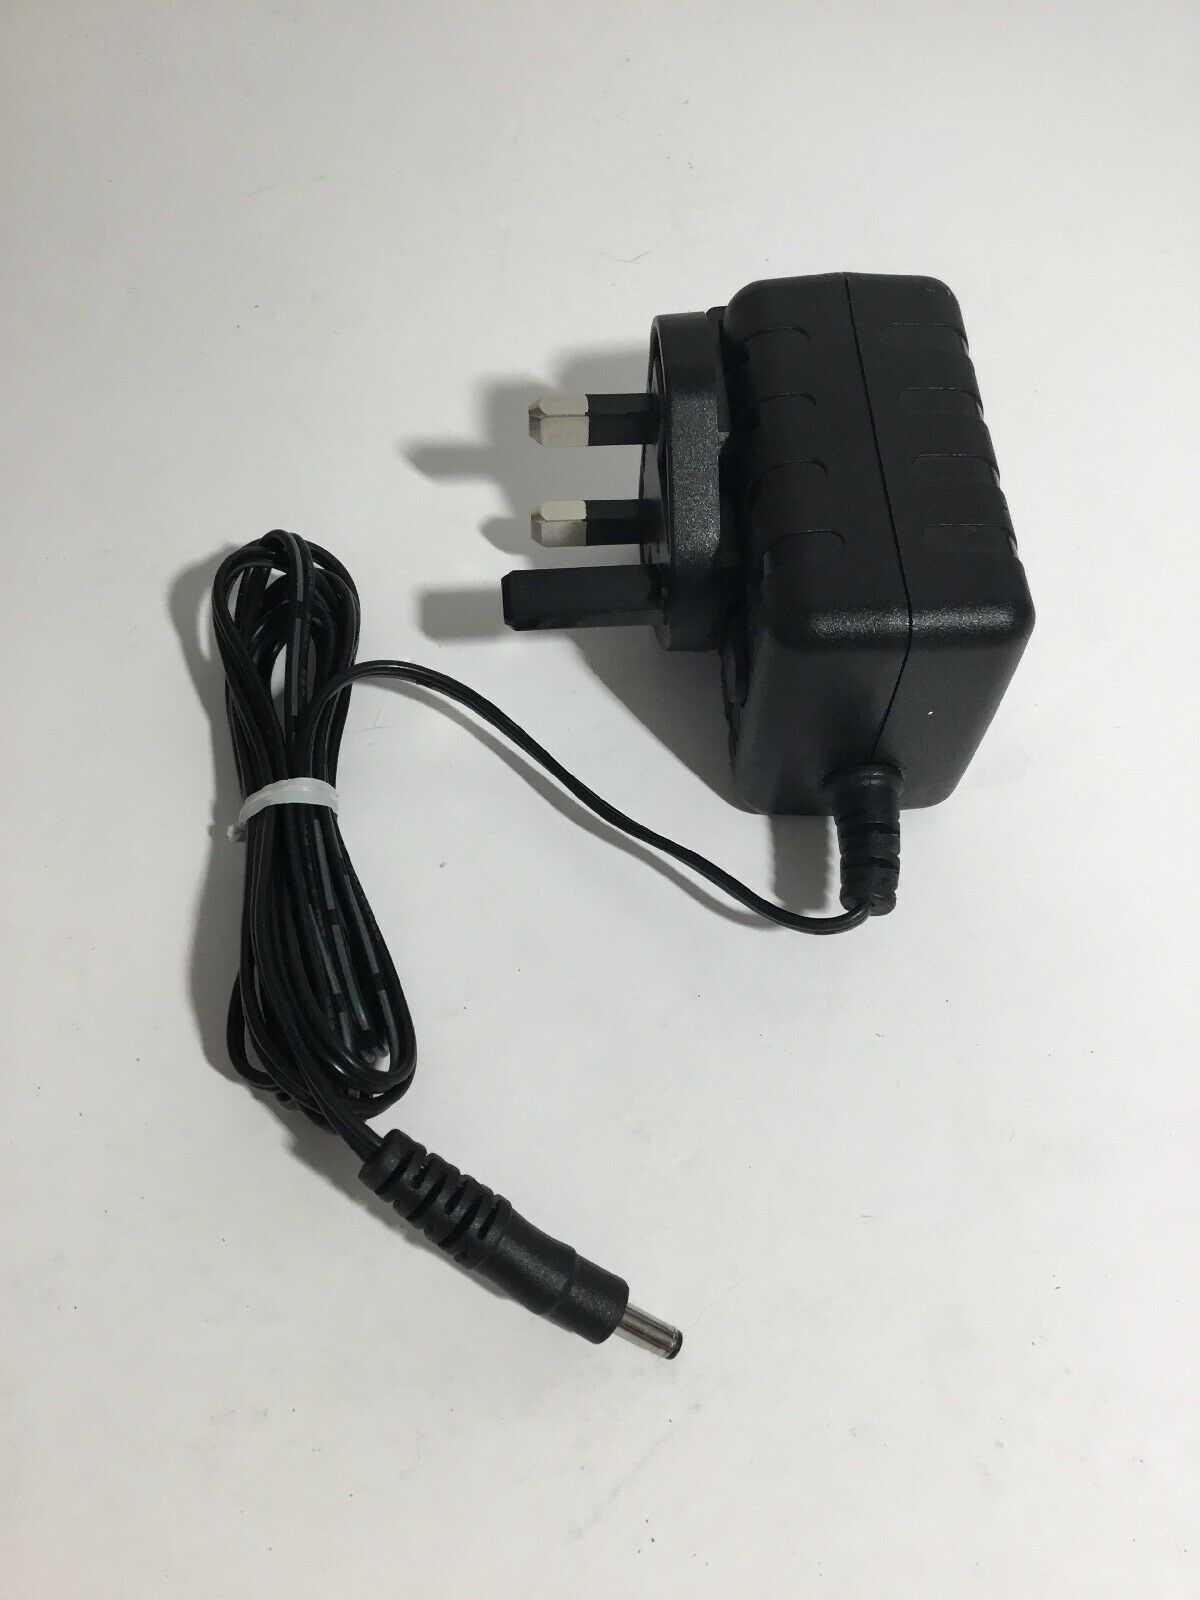 NEW D-LINK WA-18Q12R 12V 1.5A AC-DC Switching Adapter CHARGER